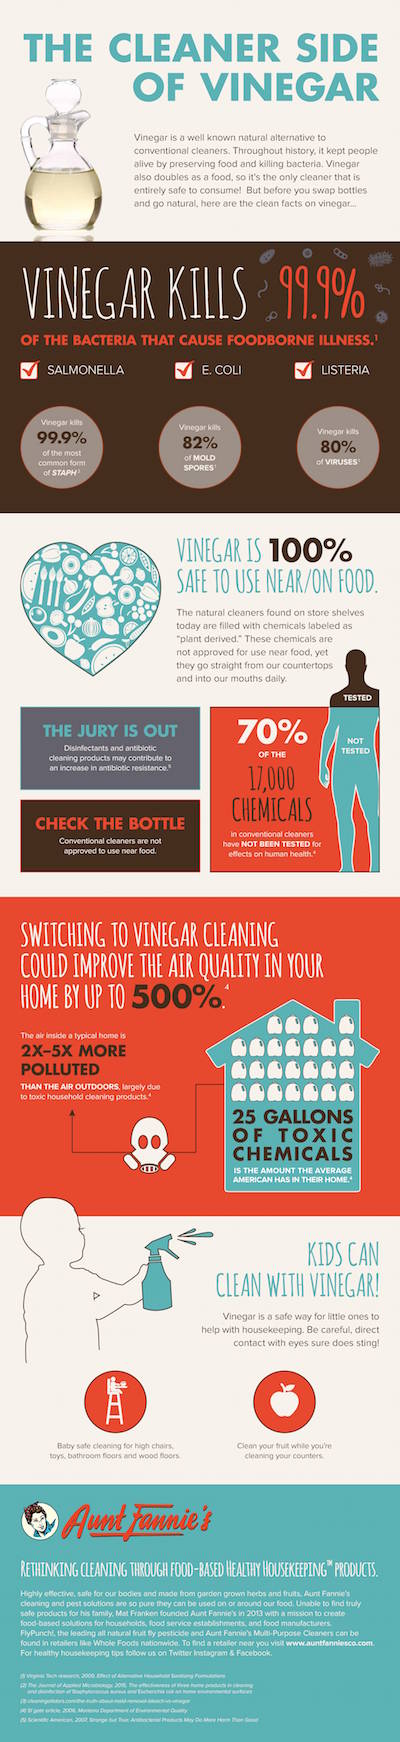 chemical-free cleaning products, vinegar cleaner